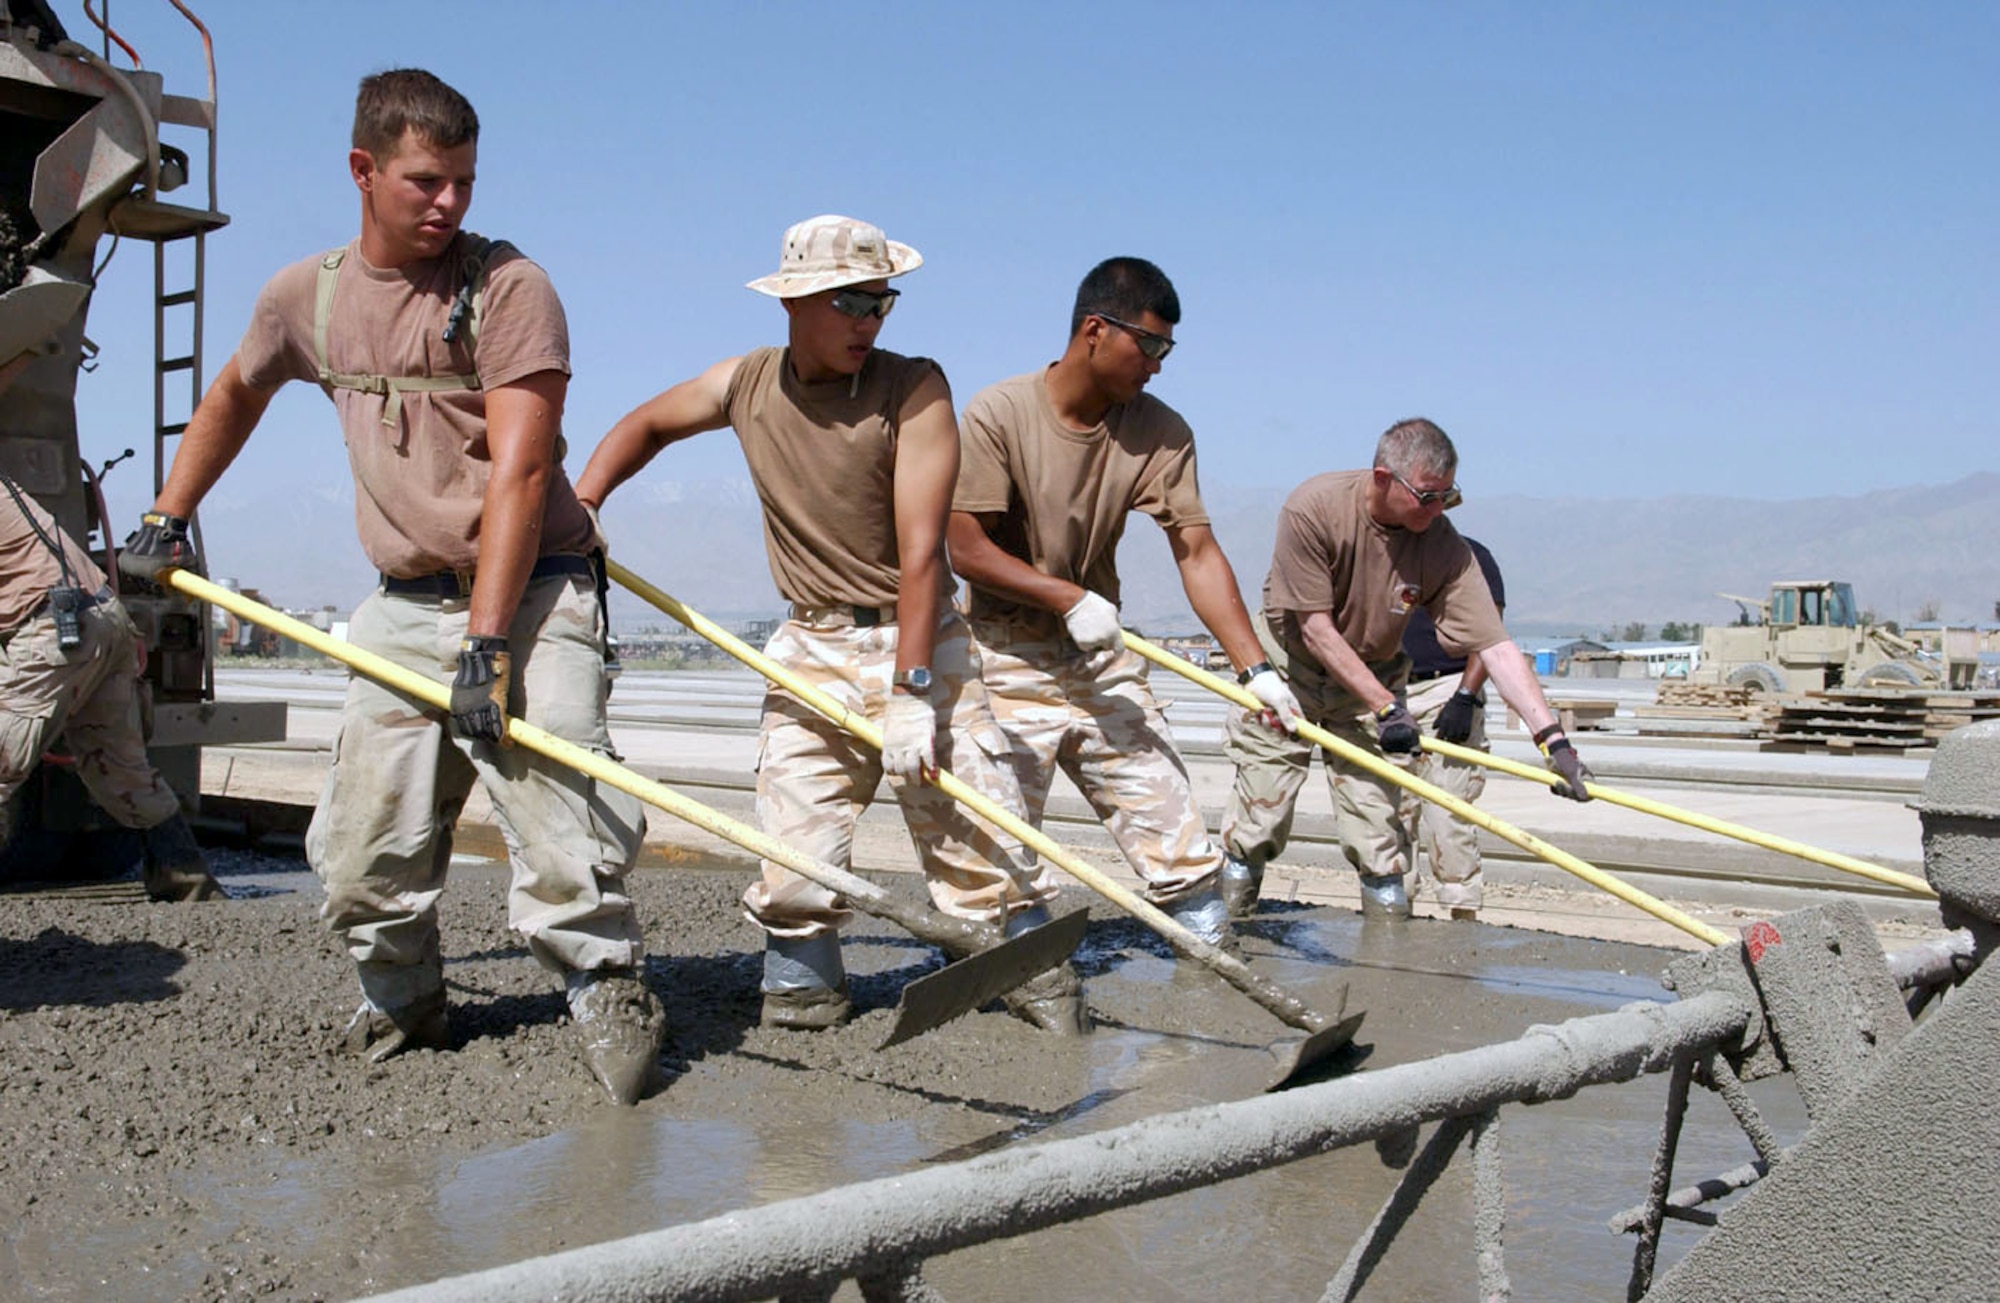 BAGRAM AIR BASE, Afghanistan -- (Left to right) Staff Sgt. Gregory Lund, South Korean army Pfcs. Yi Dong Gon and Jung Yong Hoon, and Col. Gary Woltering work side-by-side "mucking" concrete on the airfield here.  Civil engineers from the 455th Expeditionary Operations Group and the 100th Korean Engineer Corps poured about 76,000 square feet of concrete so aircraft would have more space on the flightline.  Colonel Woltering is the 455th EOG commander.  (U.S. Air Force photo by Master Sgt. Jeff Szczechowski)